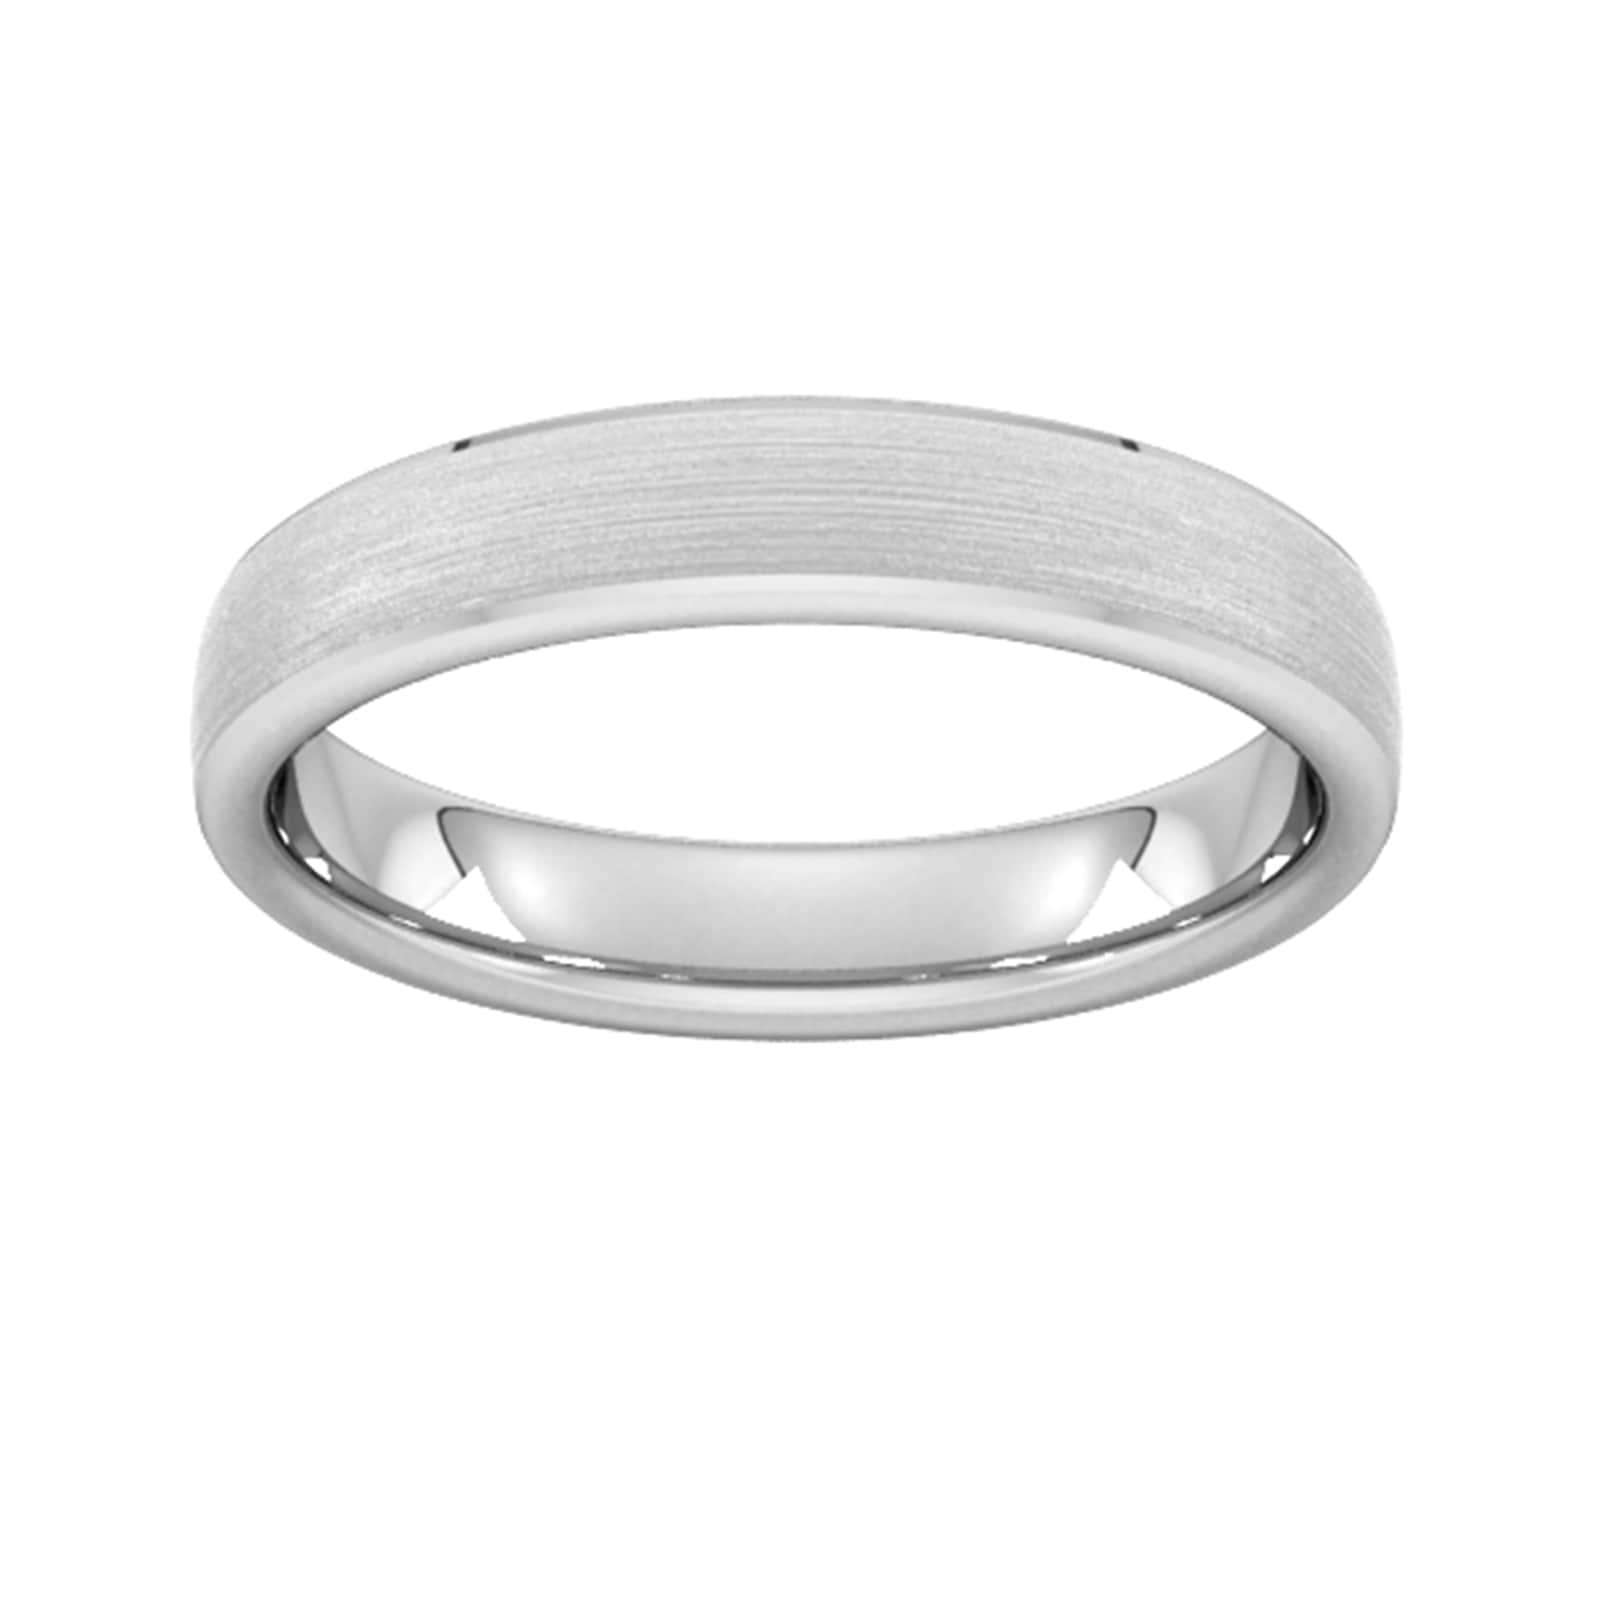 4mm Slight Court Extra Heavy Polished Chamfered Edges With Matt Centre Wedding Ring In 9 Carat White Gold - Ring Size Q